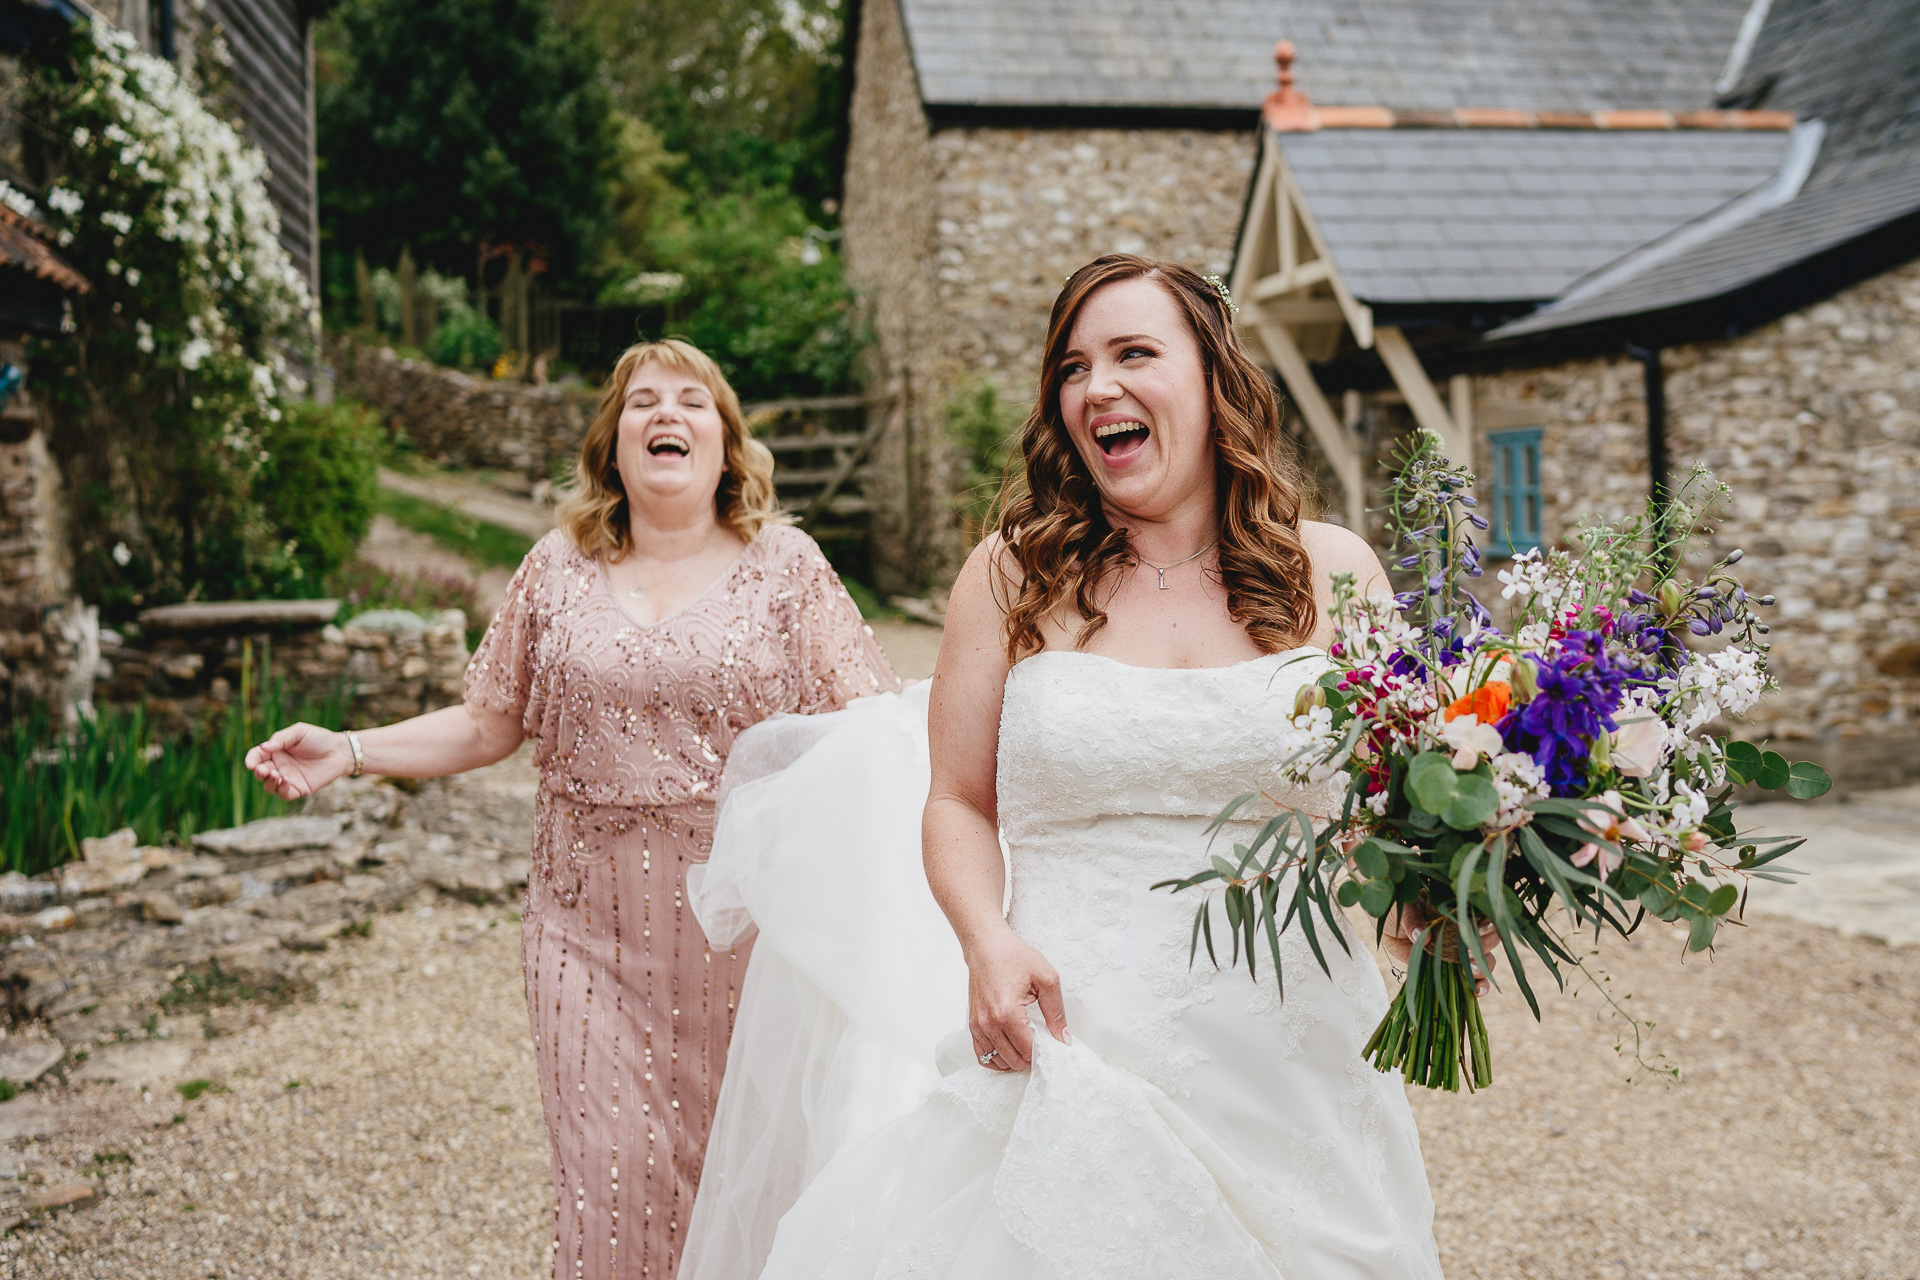 Bride and mother laughing together